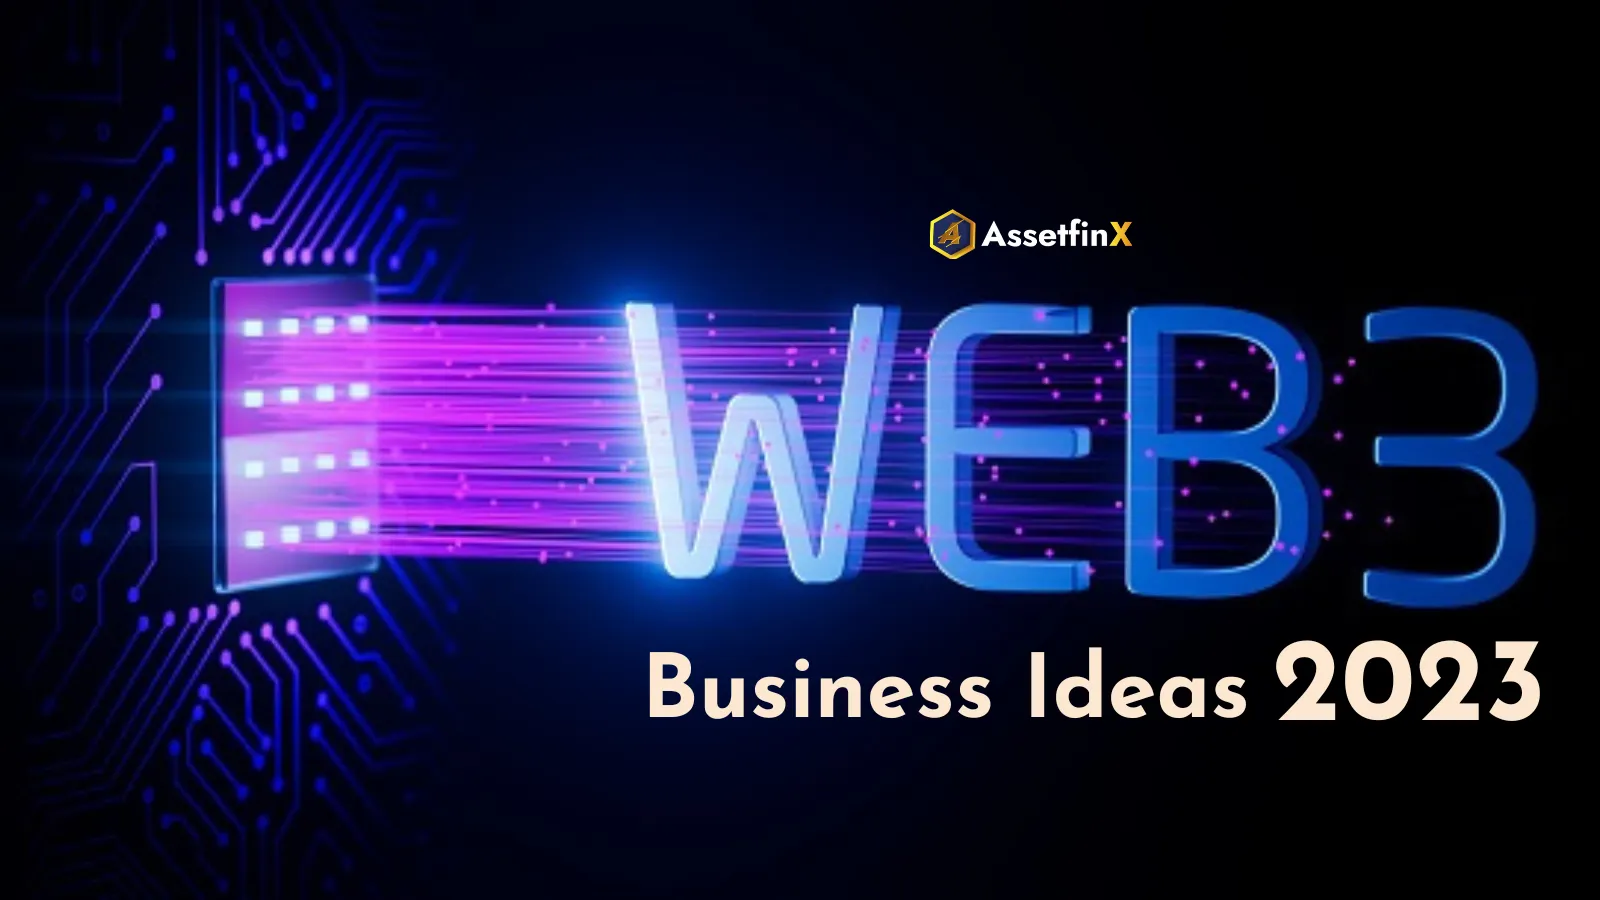 Explore The Top Picks Of Web 3.0 Business Ideas For 2023